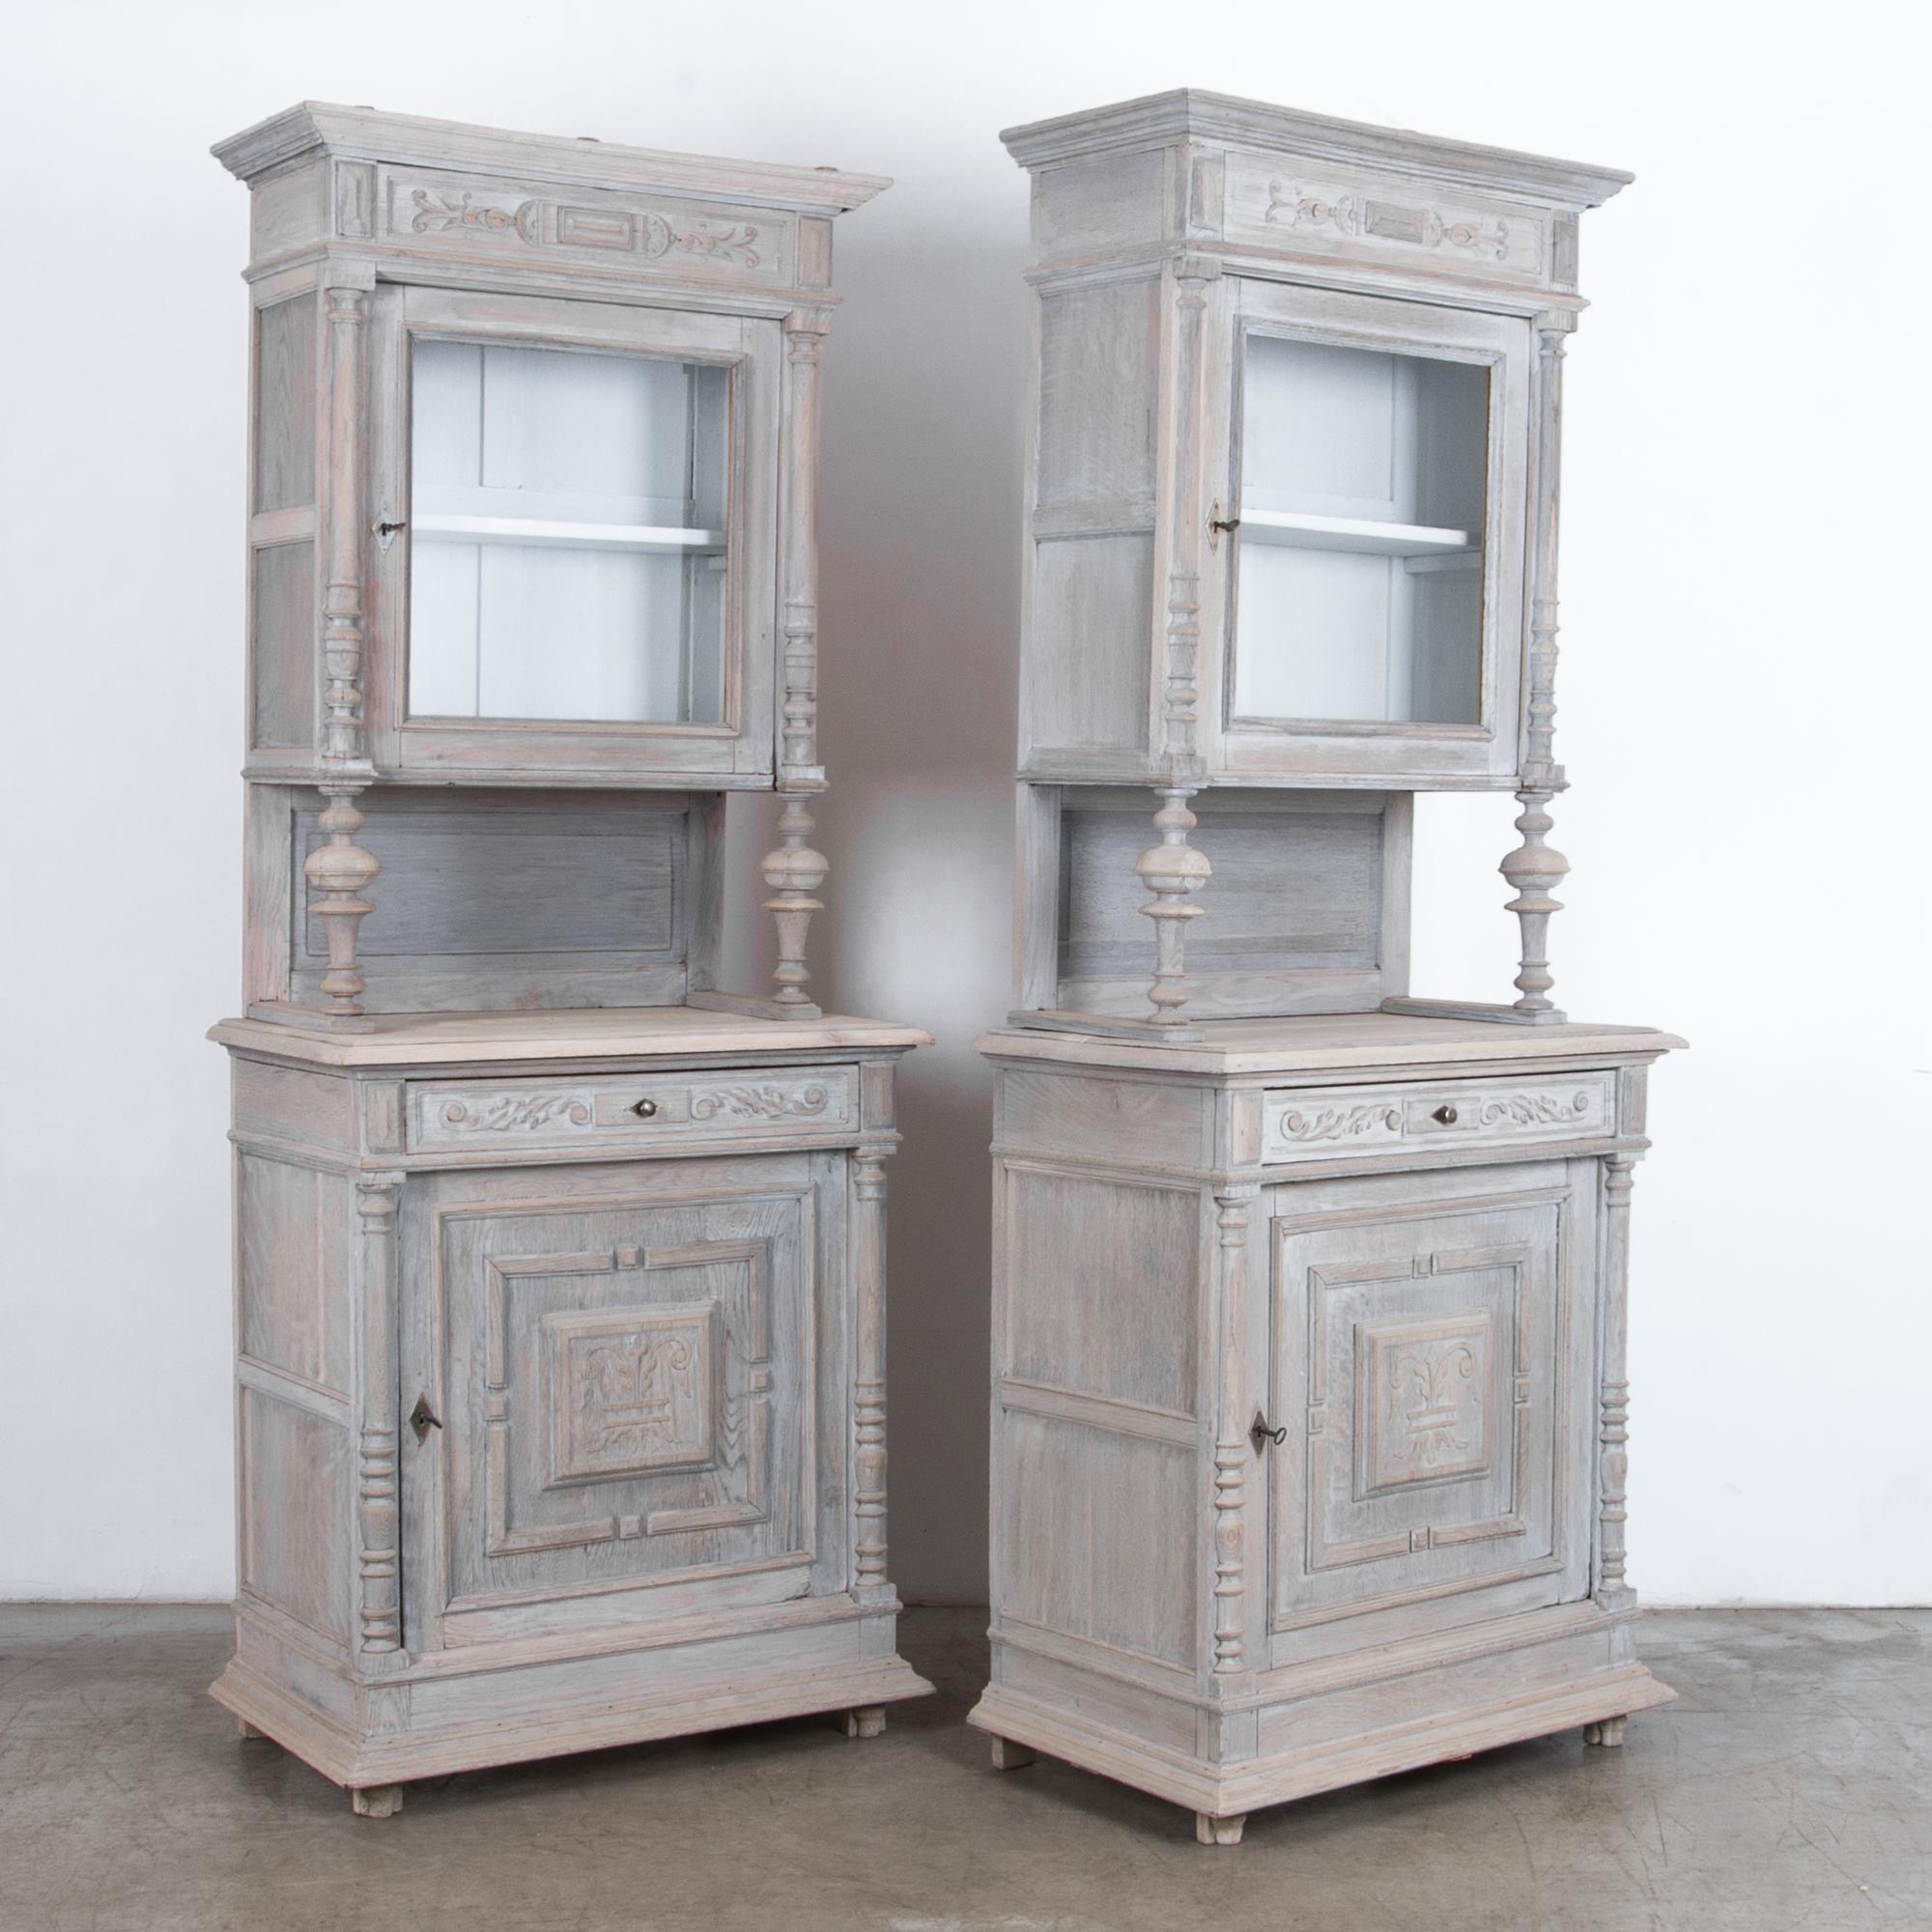 Early 20th Century Belgian Country Oak Buffet, a Pair